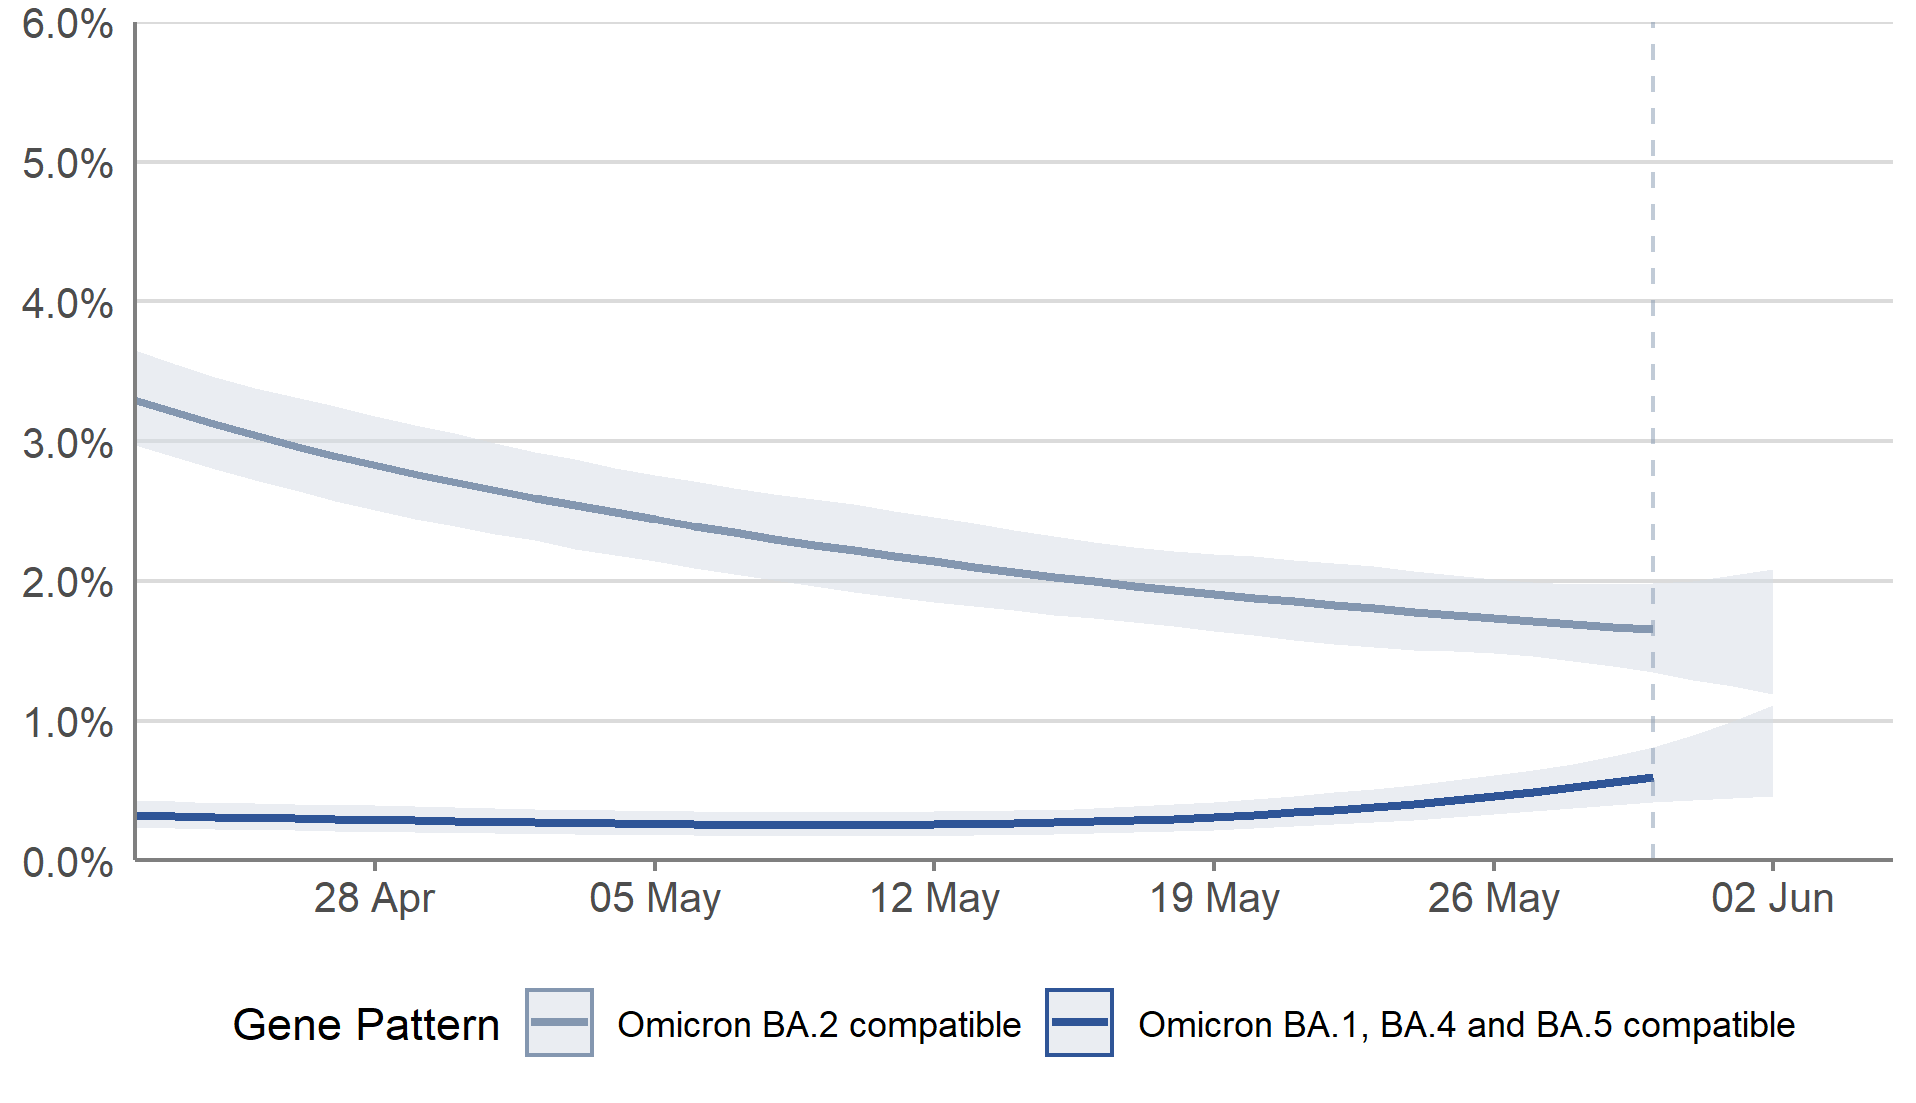 A line chart showing modelled daily estimates of the percentage of the population in Scotland testing positive for COVID-19 by variant, between 22 April and 2 June 2022. Modelled daily estimates are represented by two lines with 95% credible intervals in pale blue shading. The lines are blue for Omicron BA.1, BA.4 and BA.5 compatible infections and grey for Omicron BA.2 compatible infections. The estimated percentage of people testing positive for COVID-19 compatible with Omicron variants BA.1, BA.4 and BA.5 increased in the most recent week. Meanwhile, the trend for the positivity estimates compatible with Omicron variant BA.2 was uncertain.